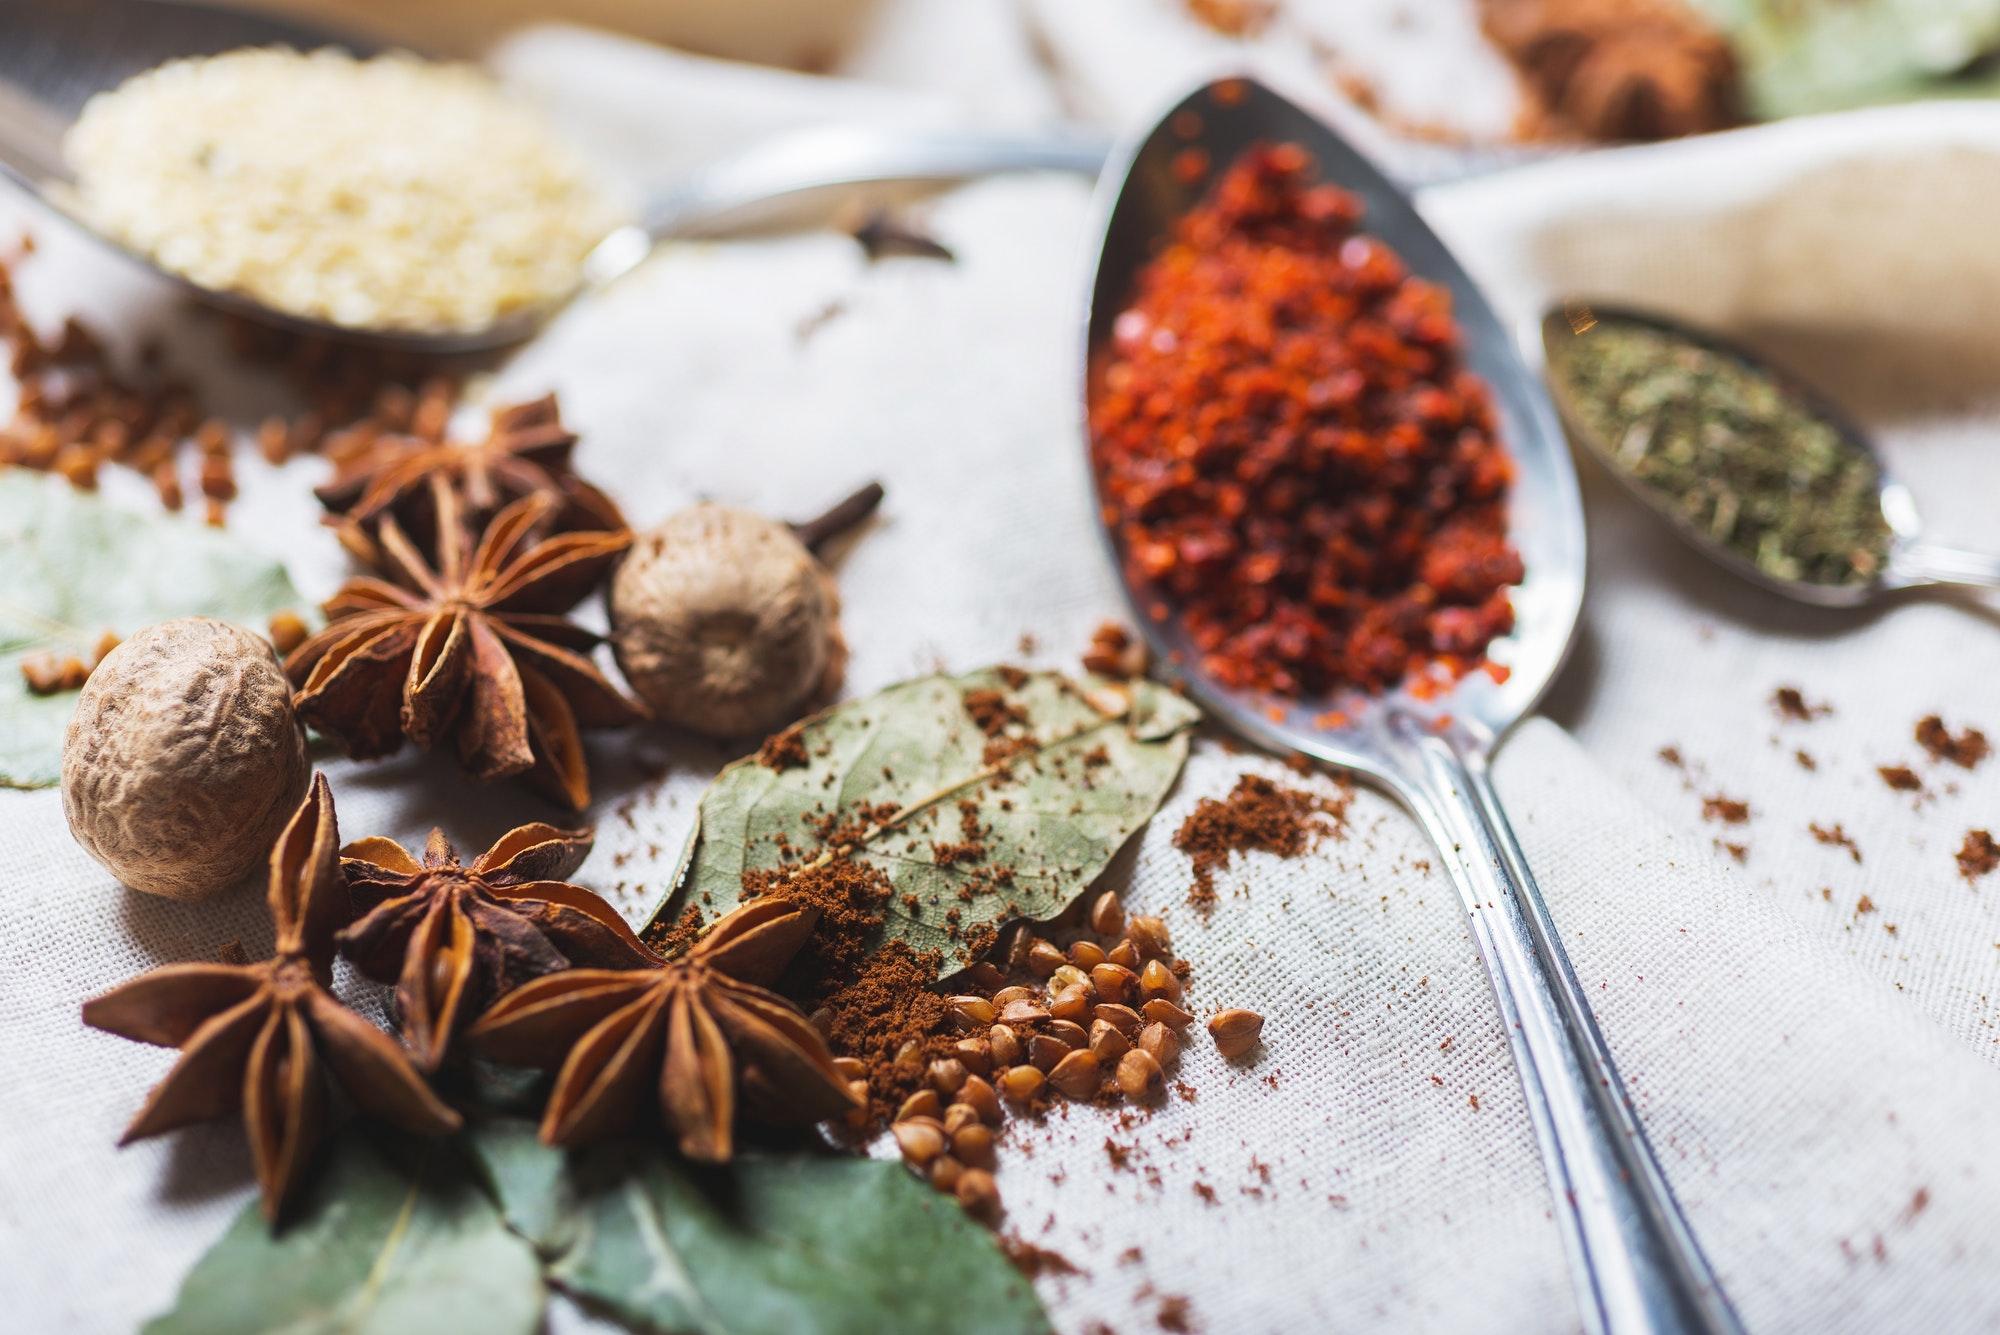 mix of different spices and herbs on a table with decor